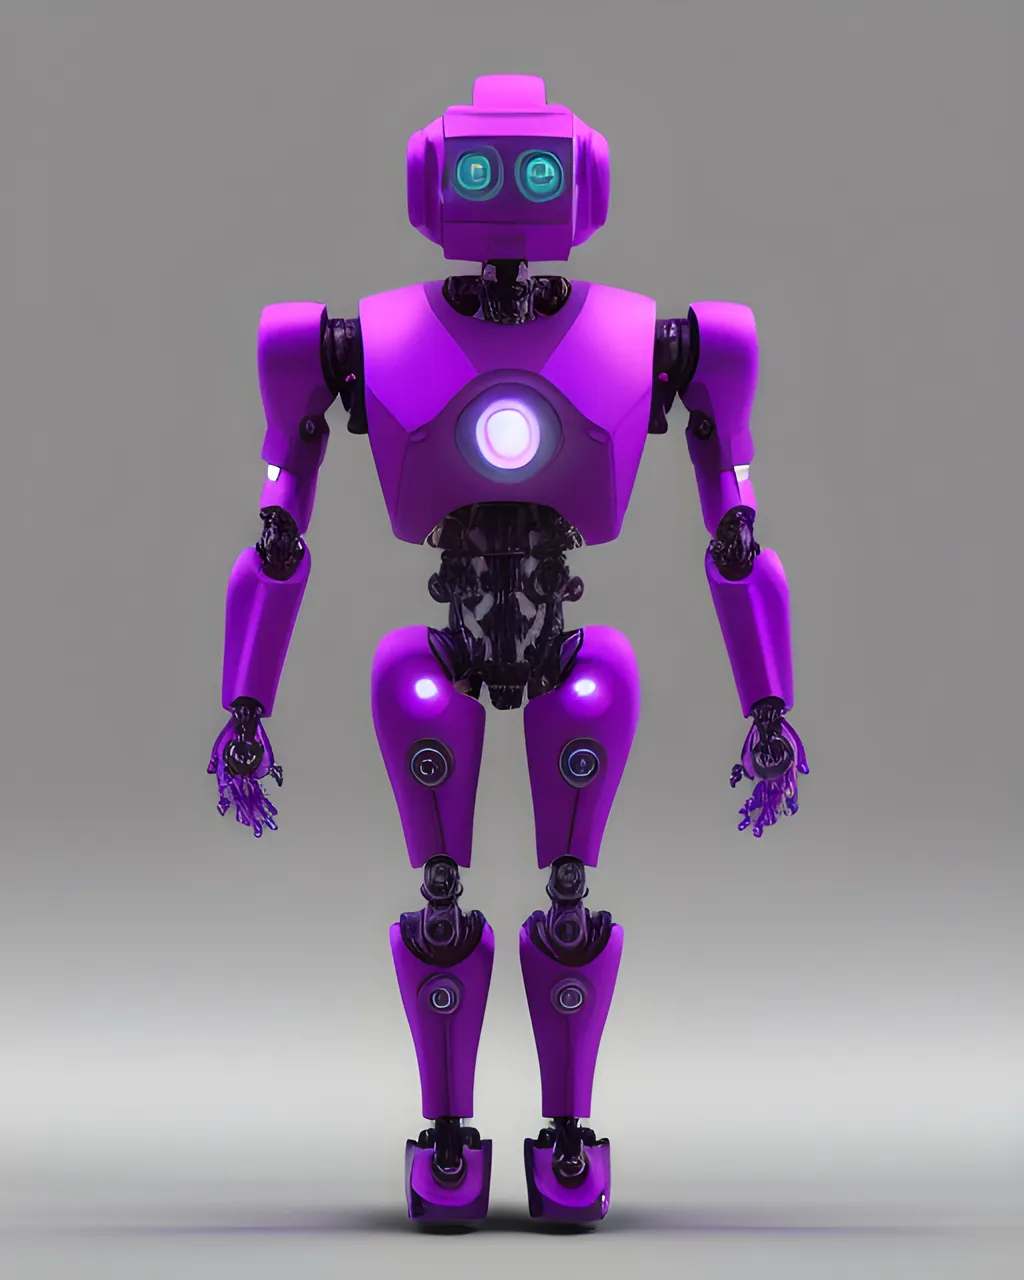 8x - Spider Robot Robotic Legs Purple Colored Skin (3).png